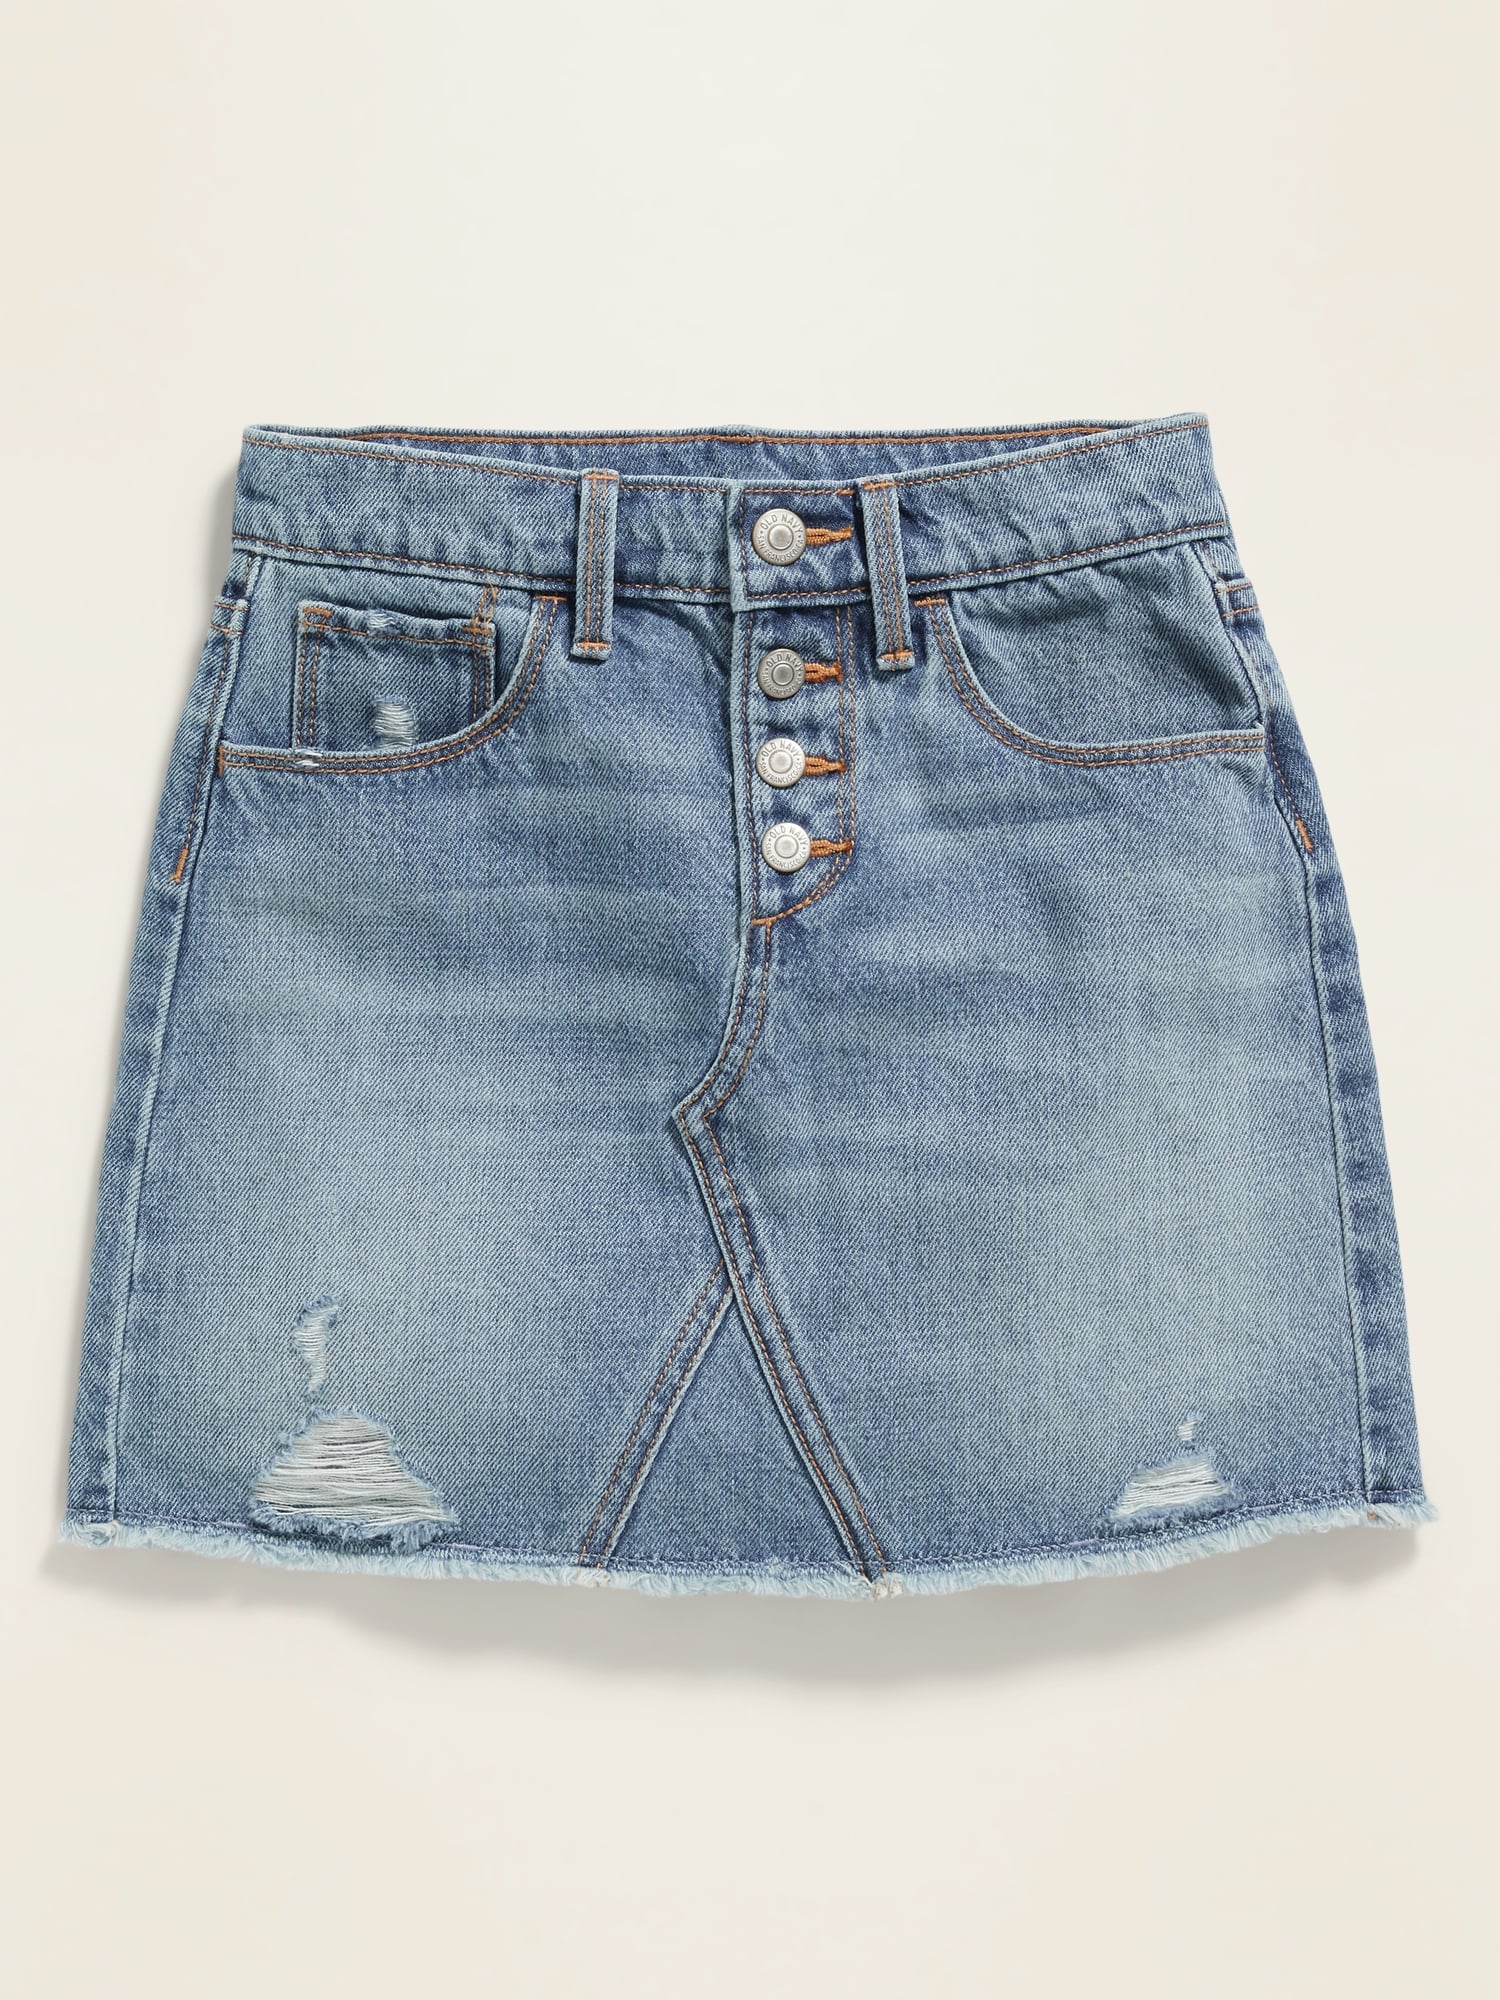 jeans skirt with buttons